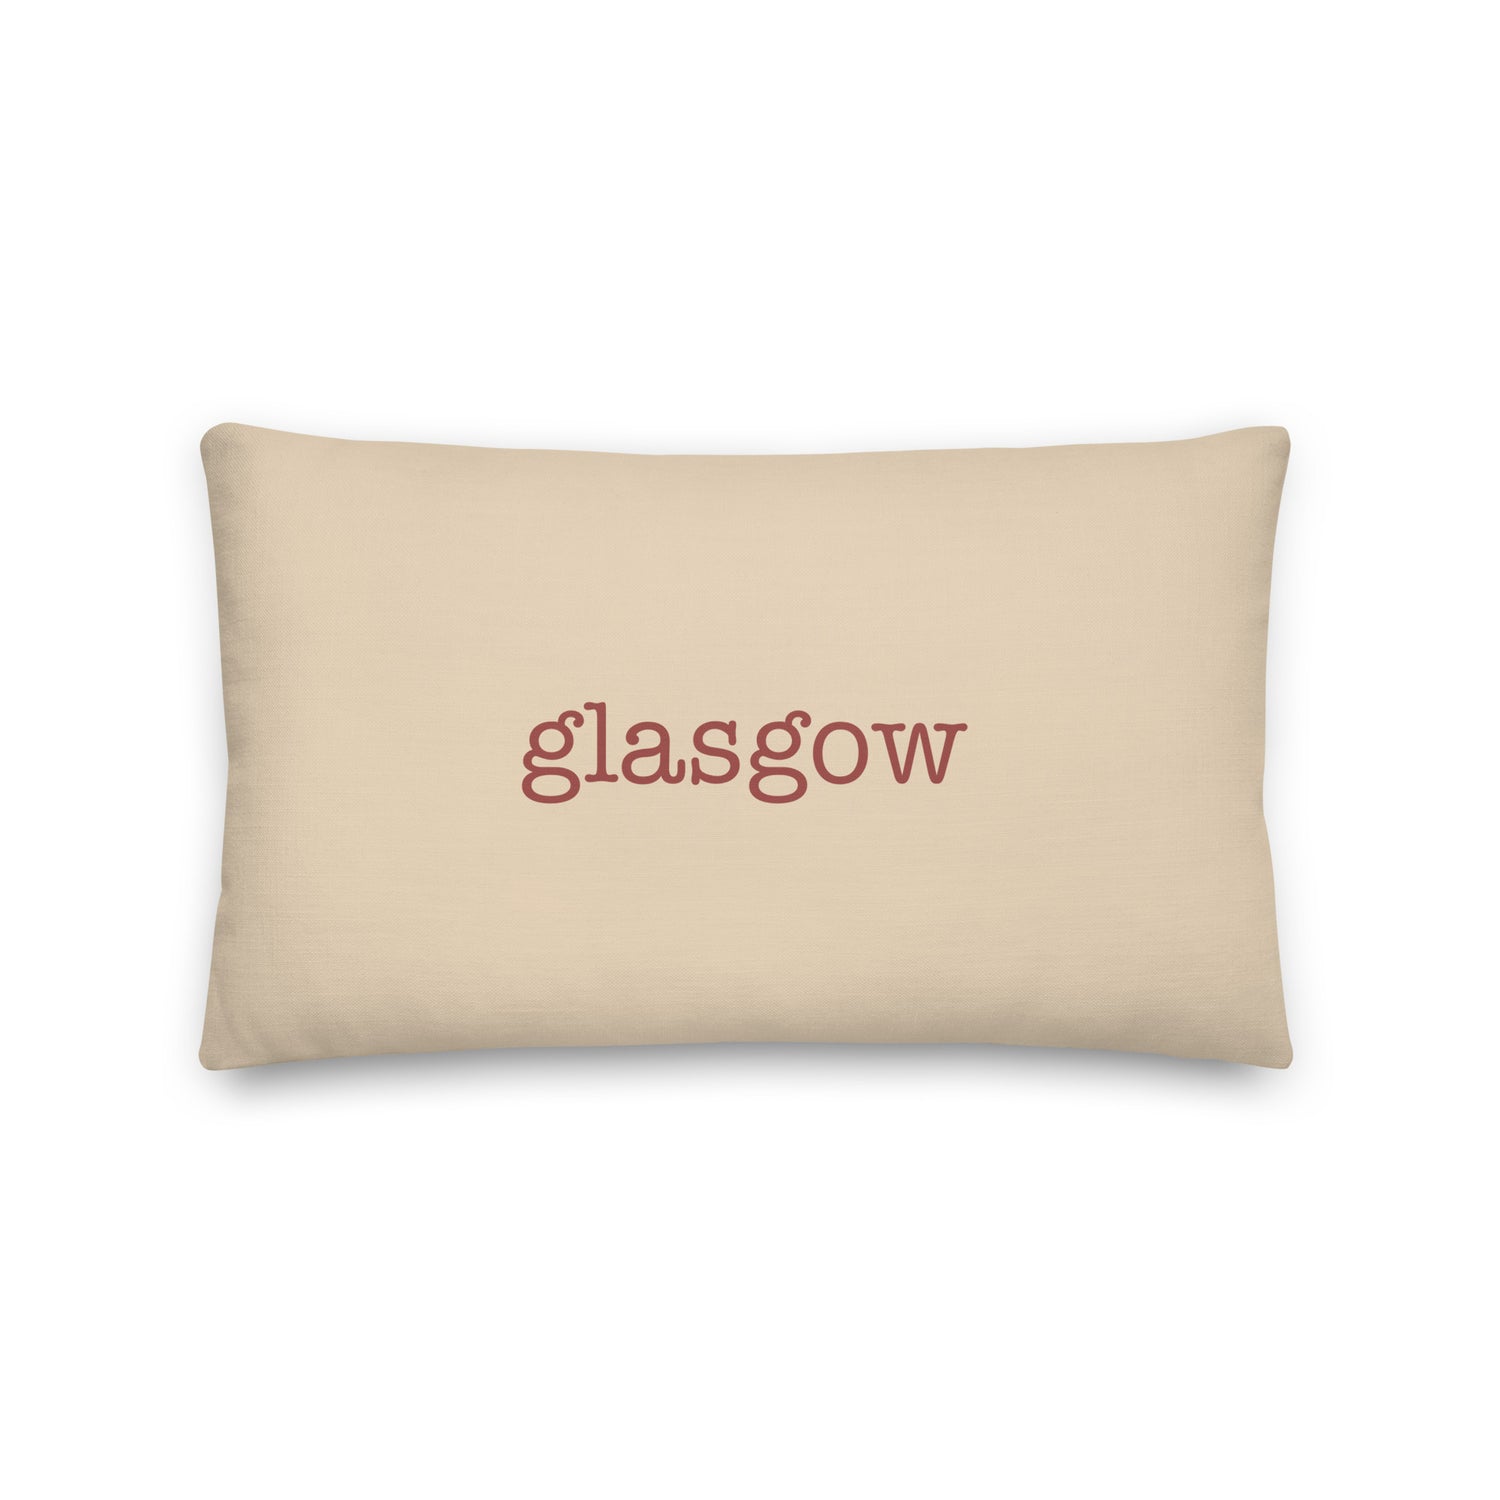 Glasgow Scotland Pillows and Blankets • GLA Airport Code